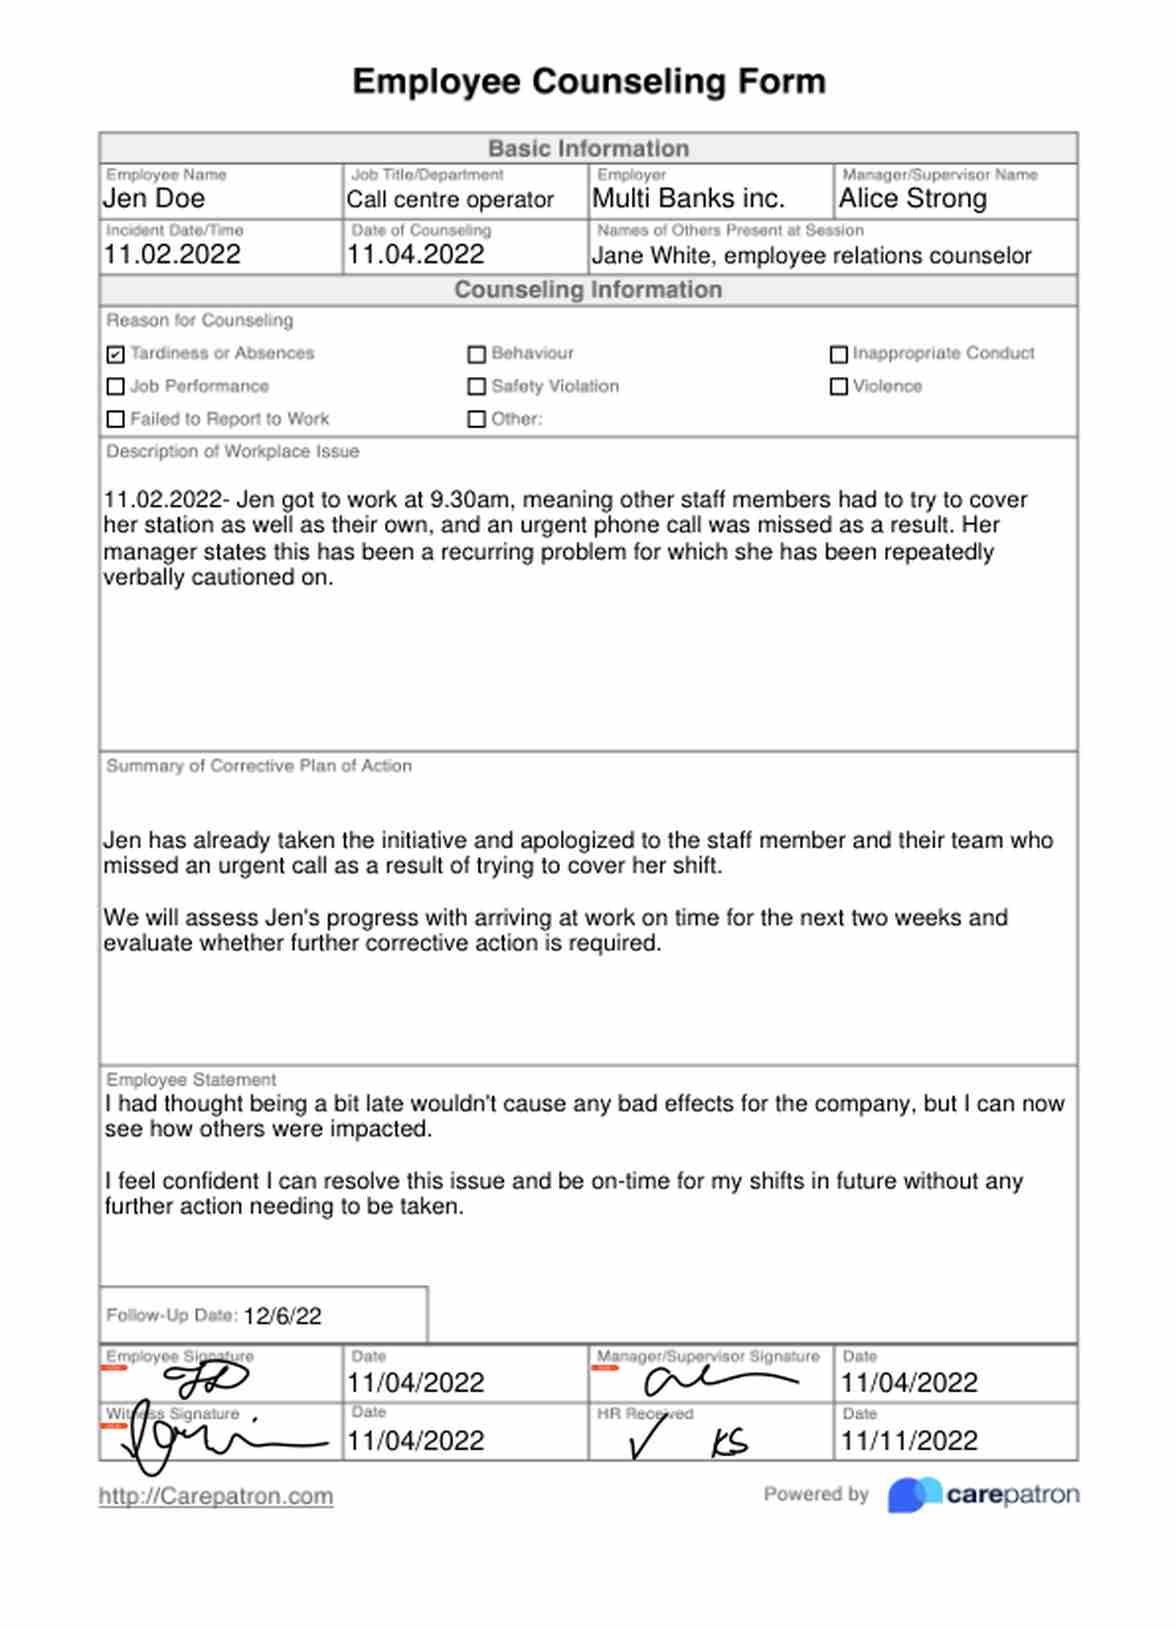 Employee Counseling Form PDF Example